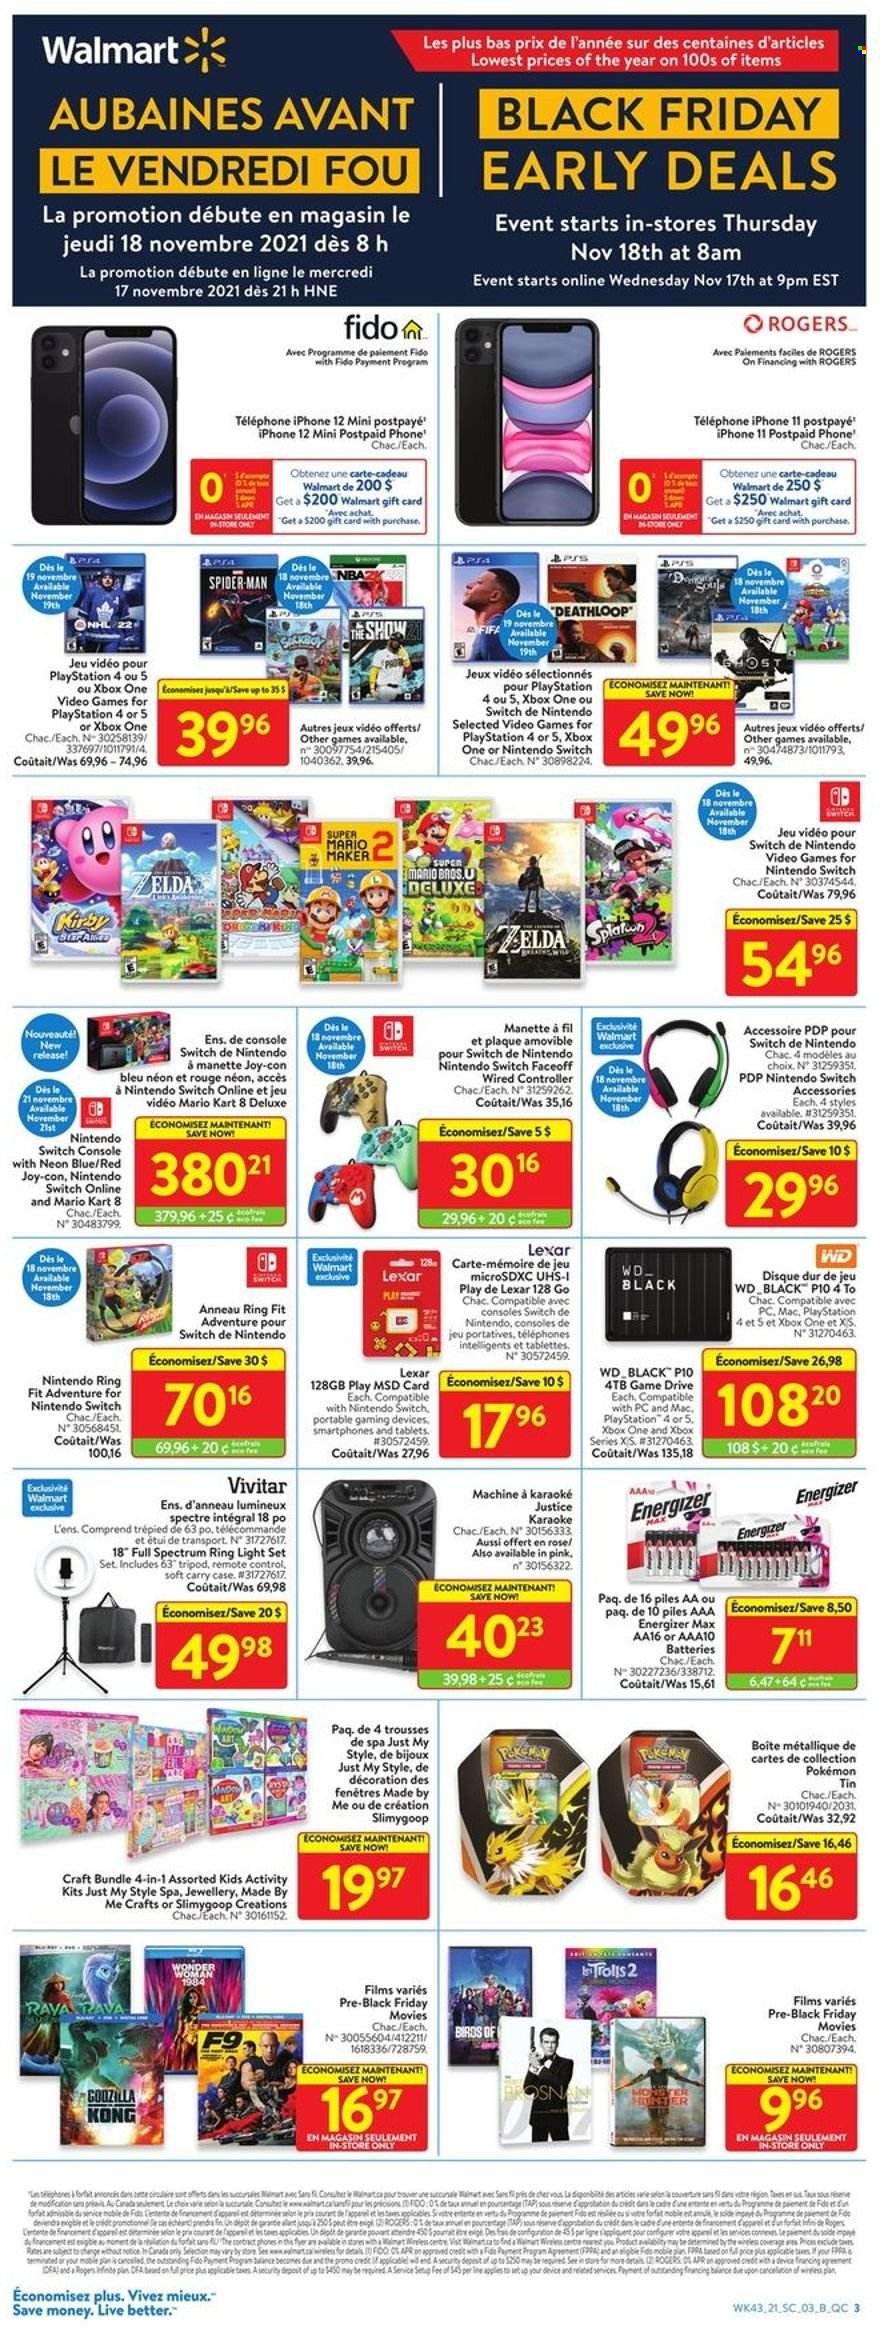 thumbnail - Walmart Flyer - November 17, 2021 - November 24, 2021 - Sales products - Nintendo Switch, apples, Monster, pan, Pokémon, Vivitar, iPhone, iPhone 11, phone, iPhone 12, WD, PlayStation, PlayStation 4, tripod, remote control, light set, Spectrum, Energizer, Xbox One, Xbox. Page 3.